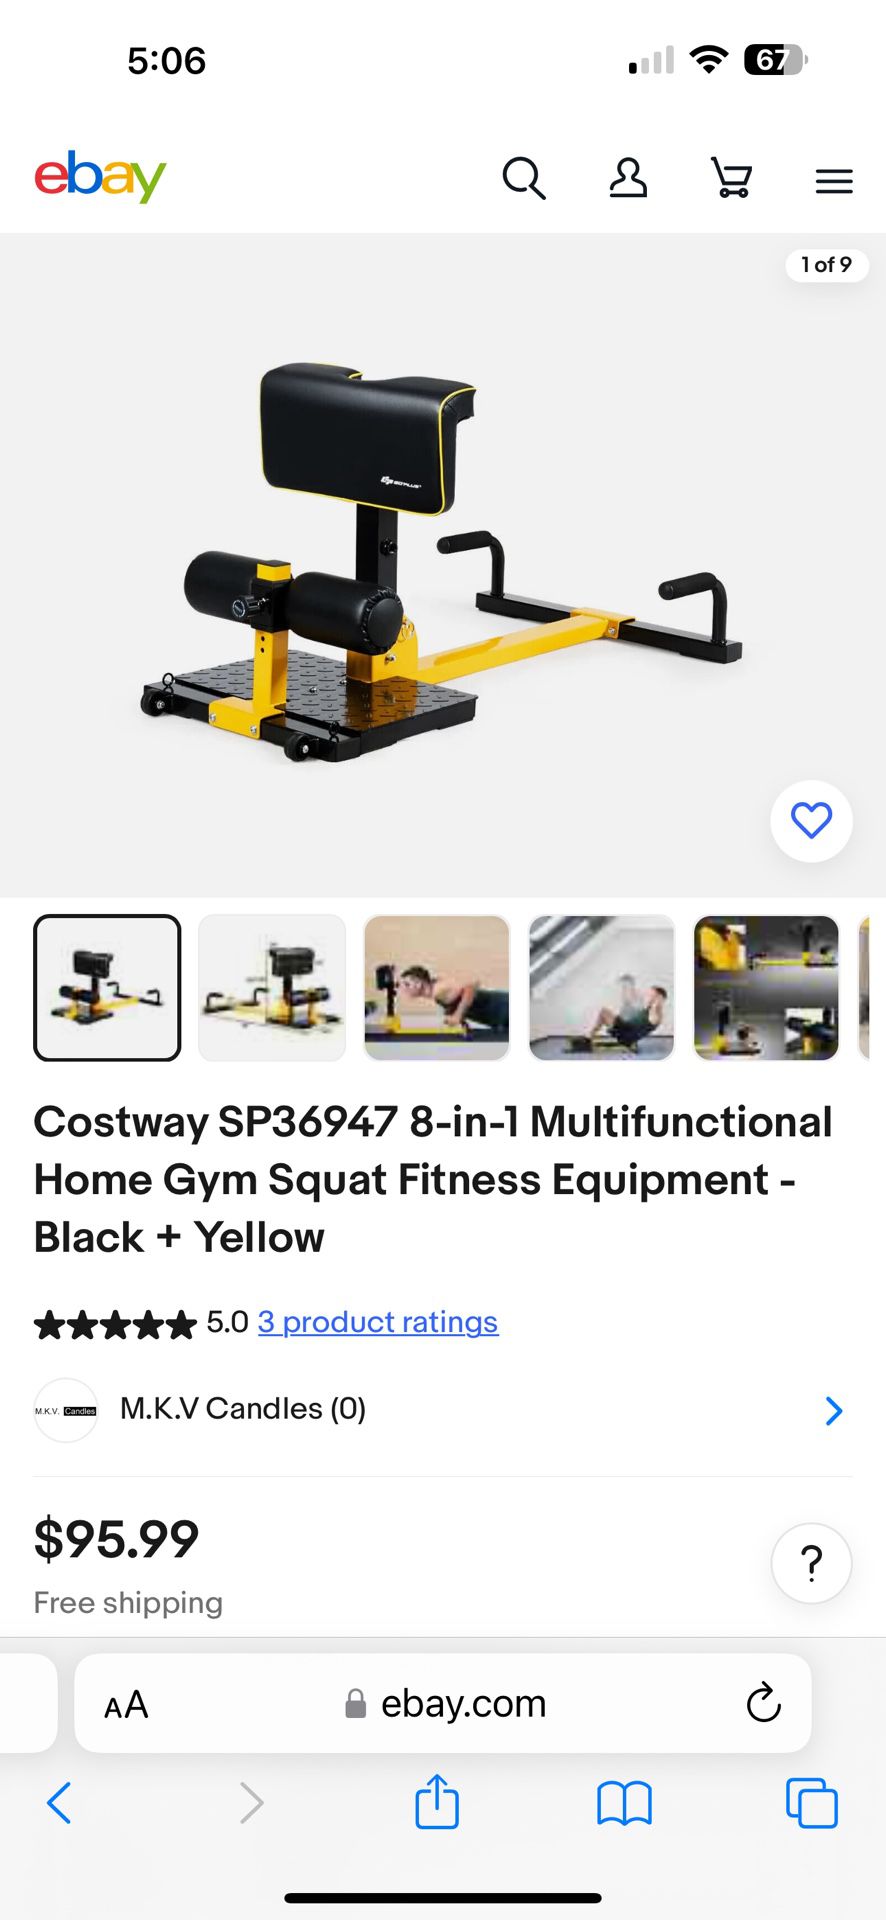 Costway SP36947 8-in-1 Multifunctional Home Gym Squat Fitness Equipment - Black + Yellow